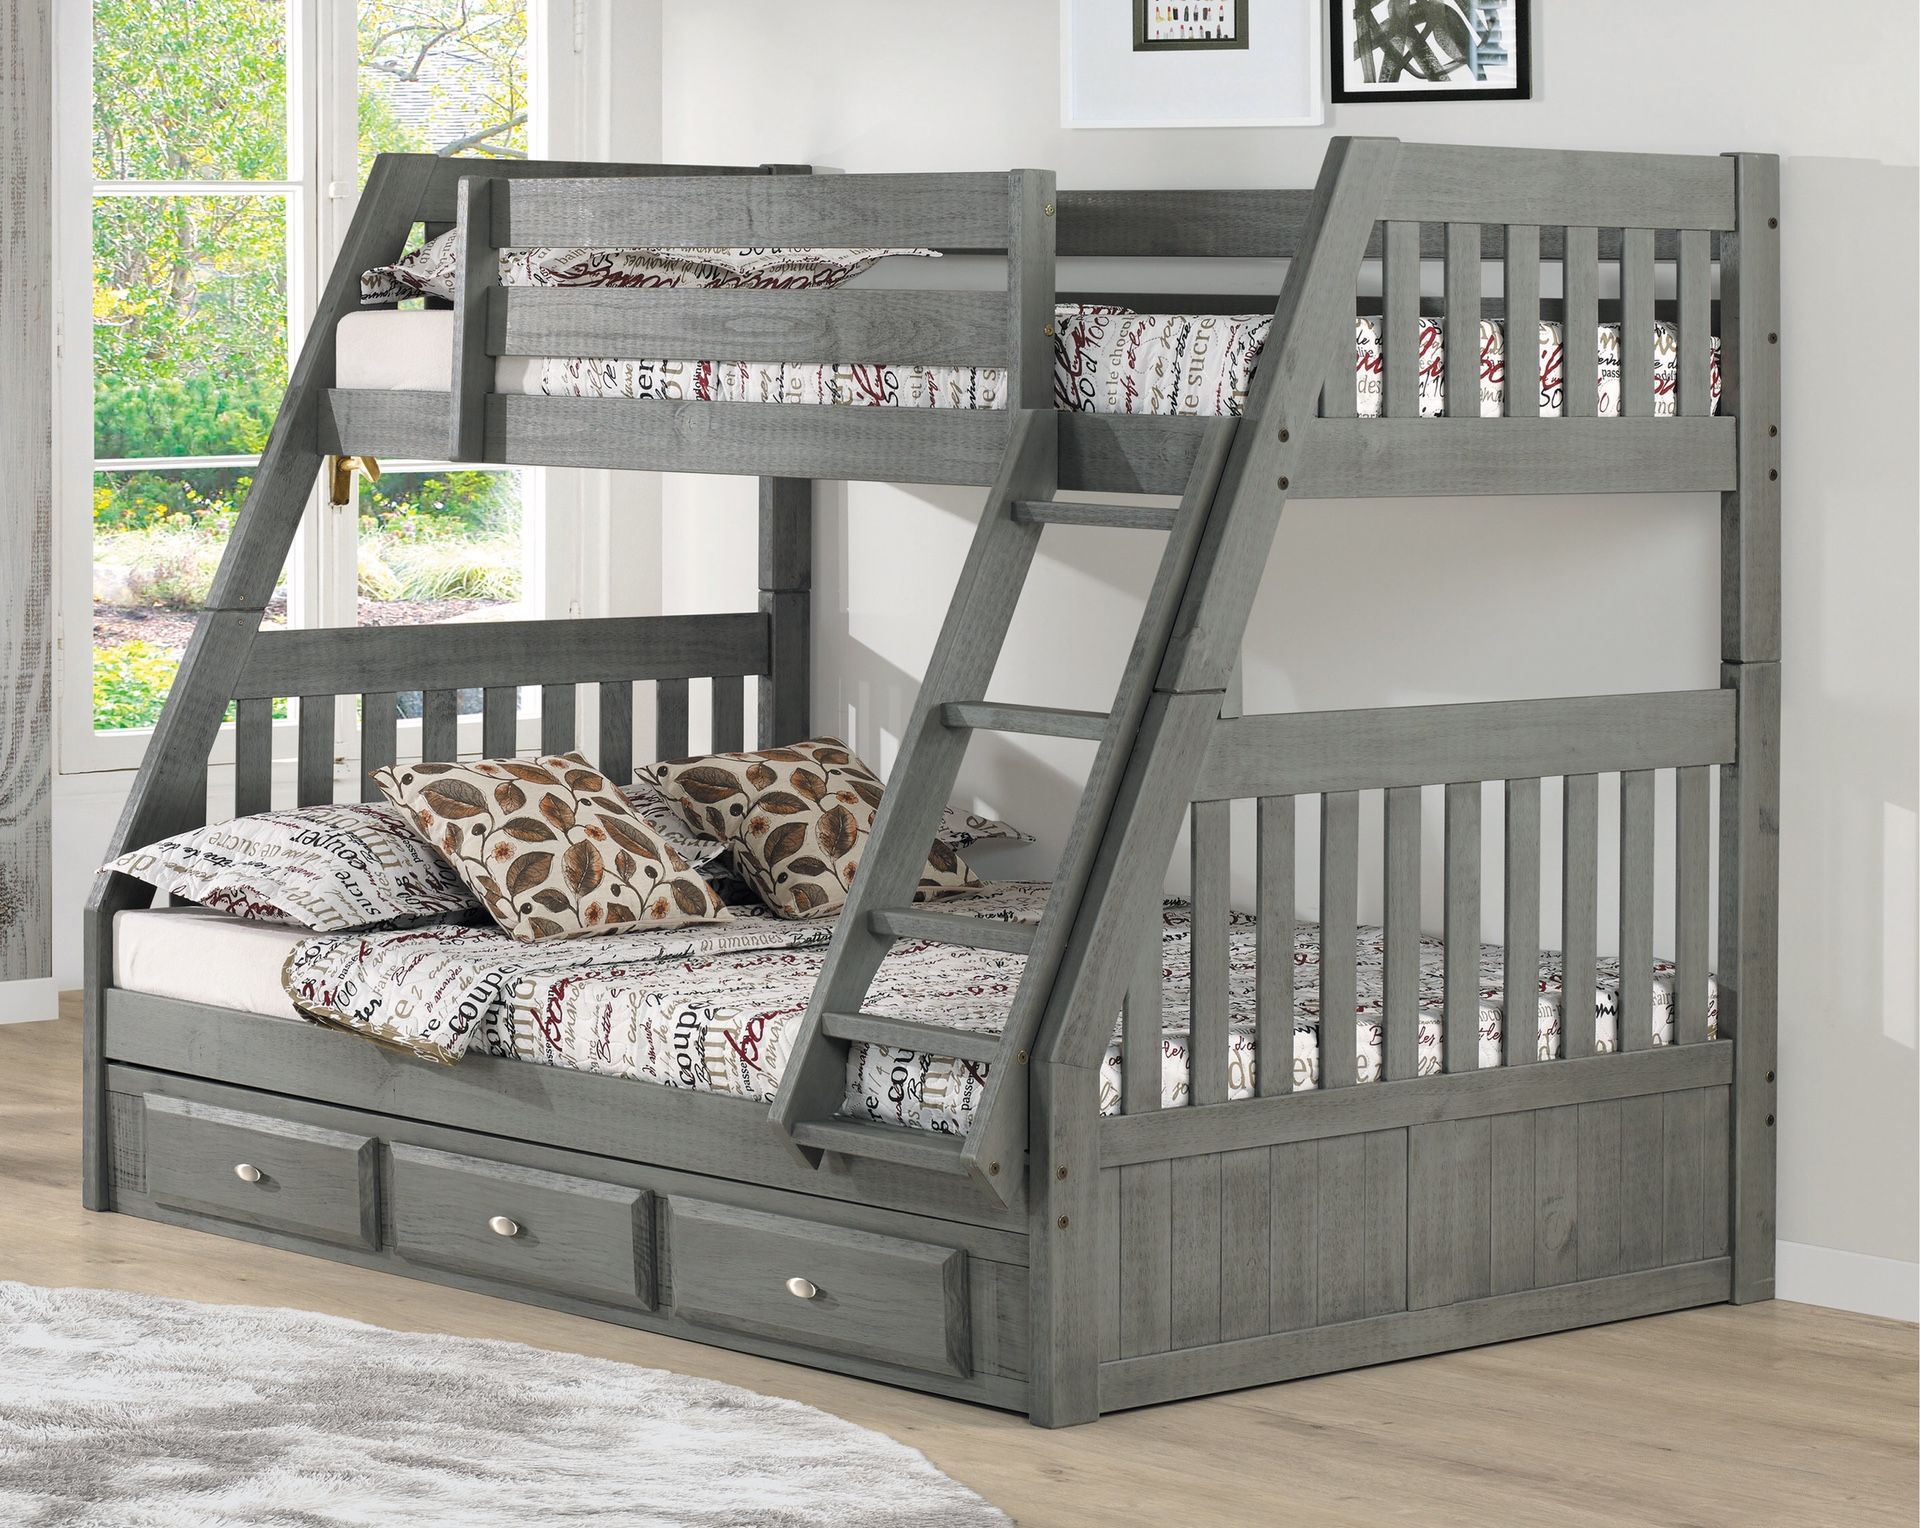 Twin over full Bunk Bed (Delivery and assembly included)